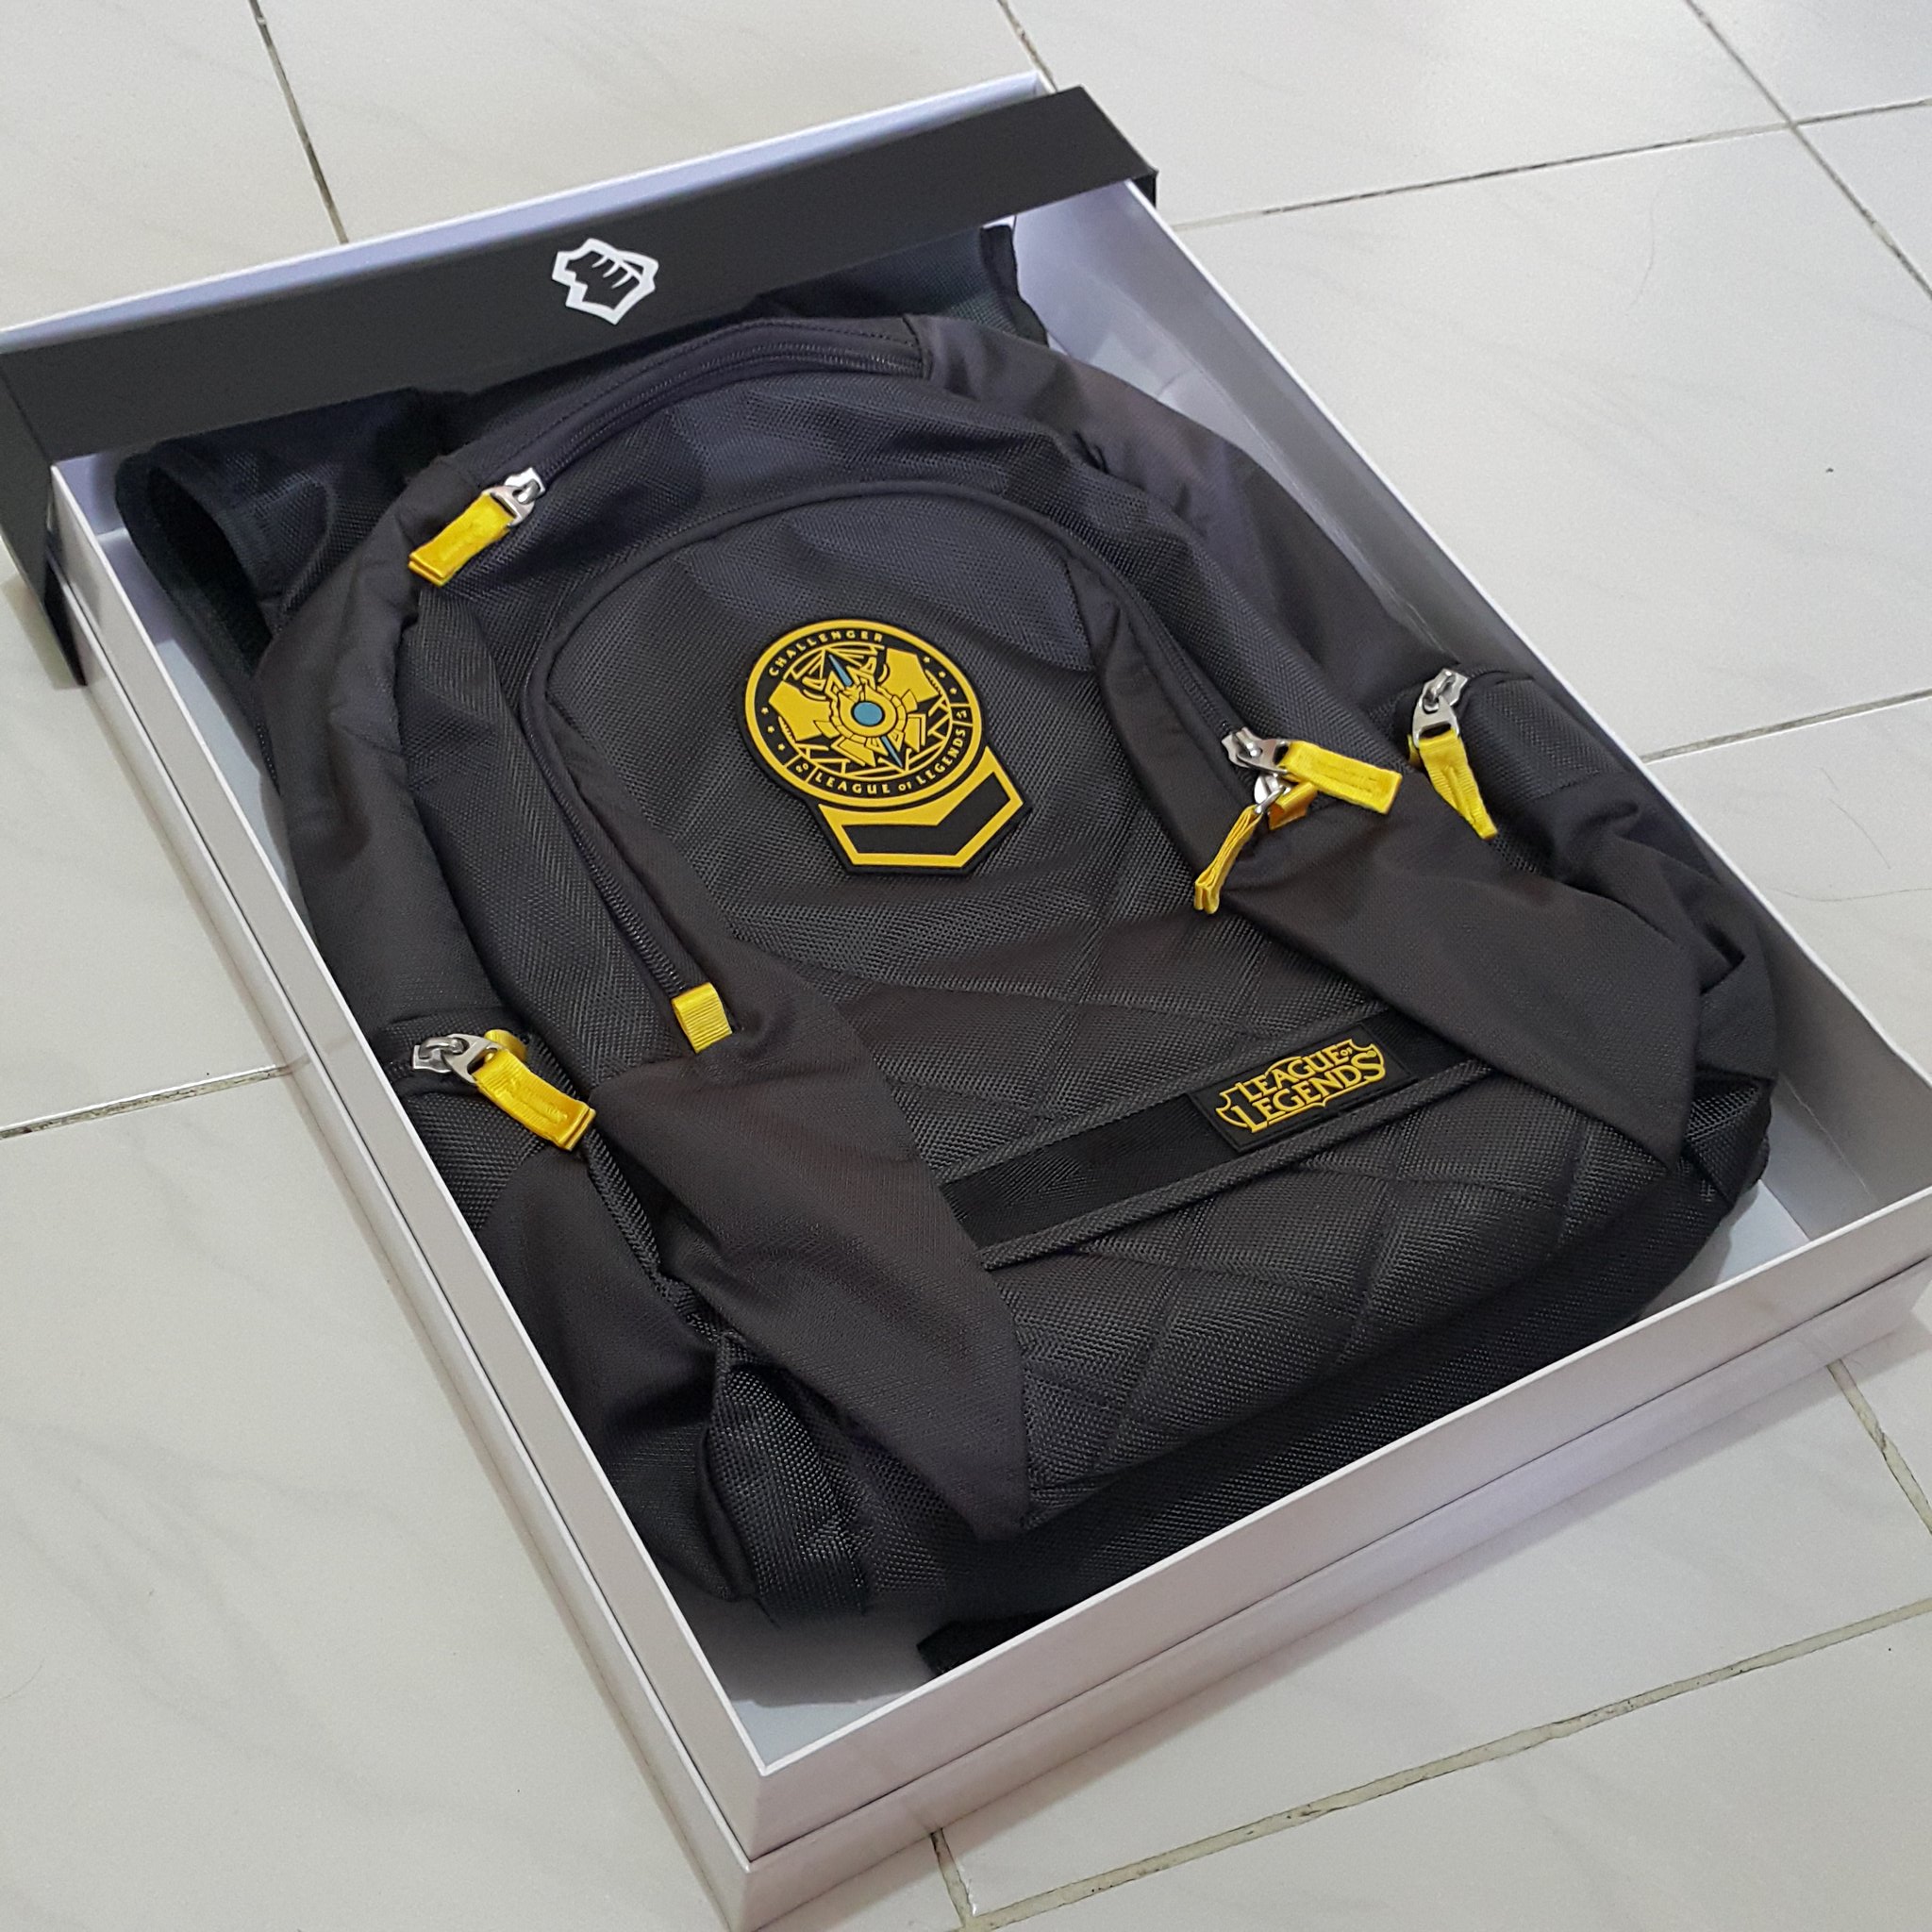 Aganov Boris on X: For sale Challenger Backpack season 7 (2017) League of  Legends Included in package: 1. Official Box Case 2. Letter from Riot Games  3. Challenger Backpack 2017 PM your